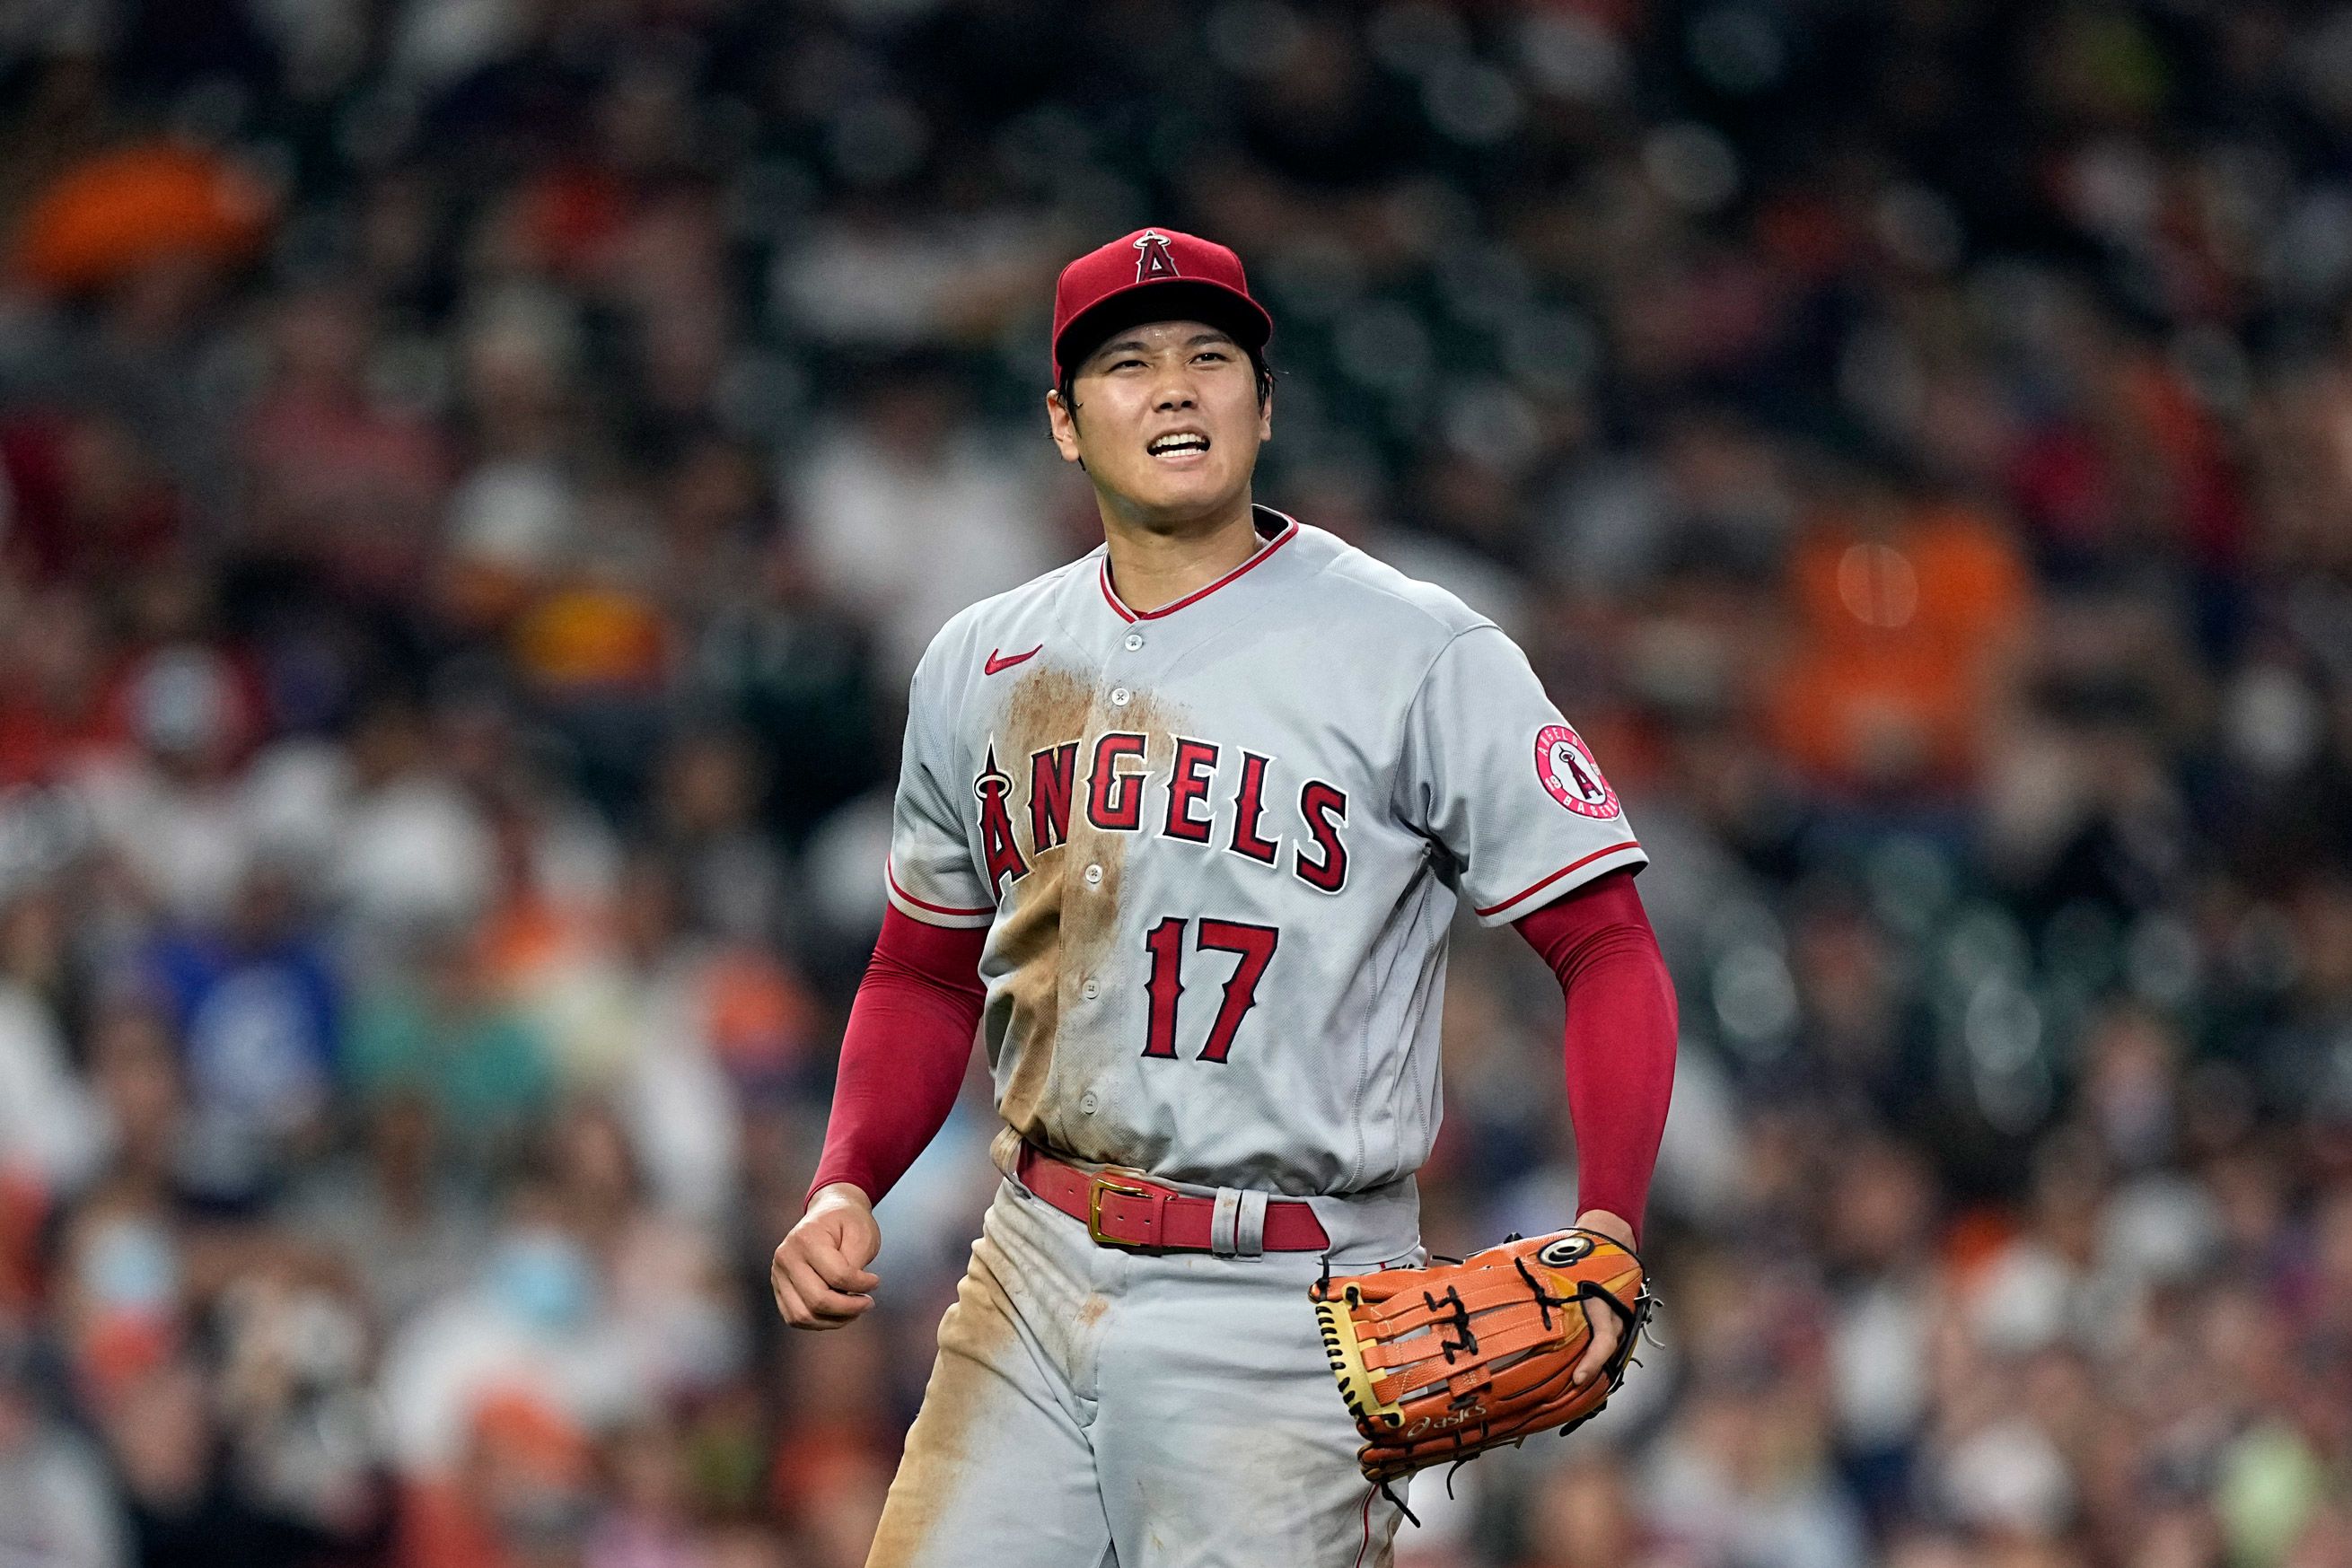 Los Angeles Angels fans love seeing Shohei Ohtani joking around with  opponent after being hit by a pitch: The greatest player and the nicest  guy, How can u not root for this